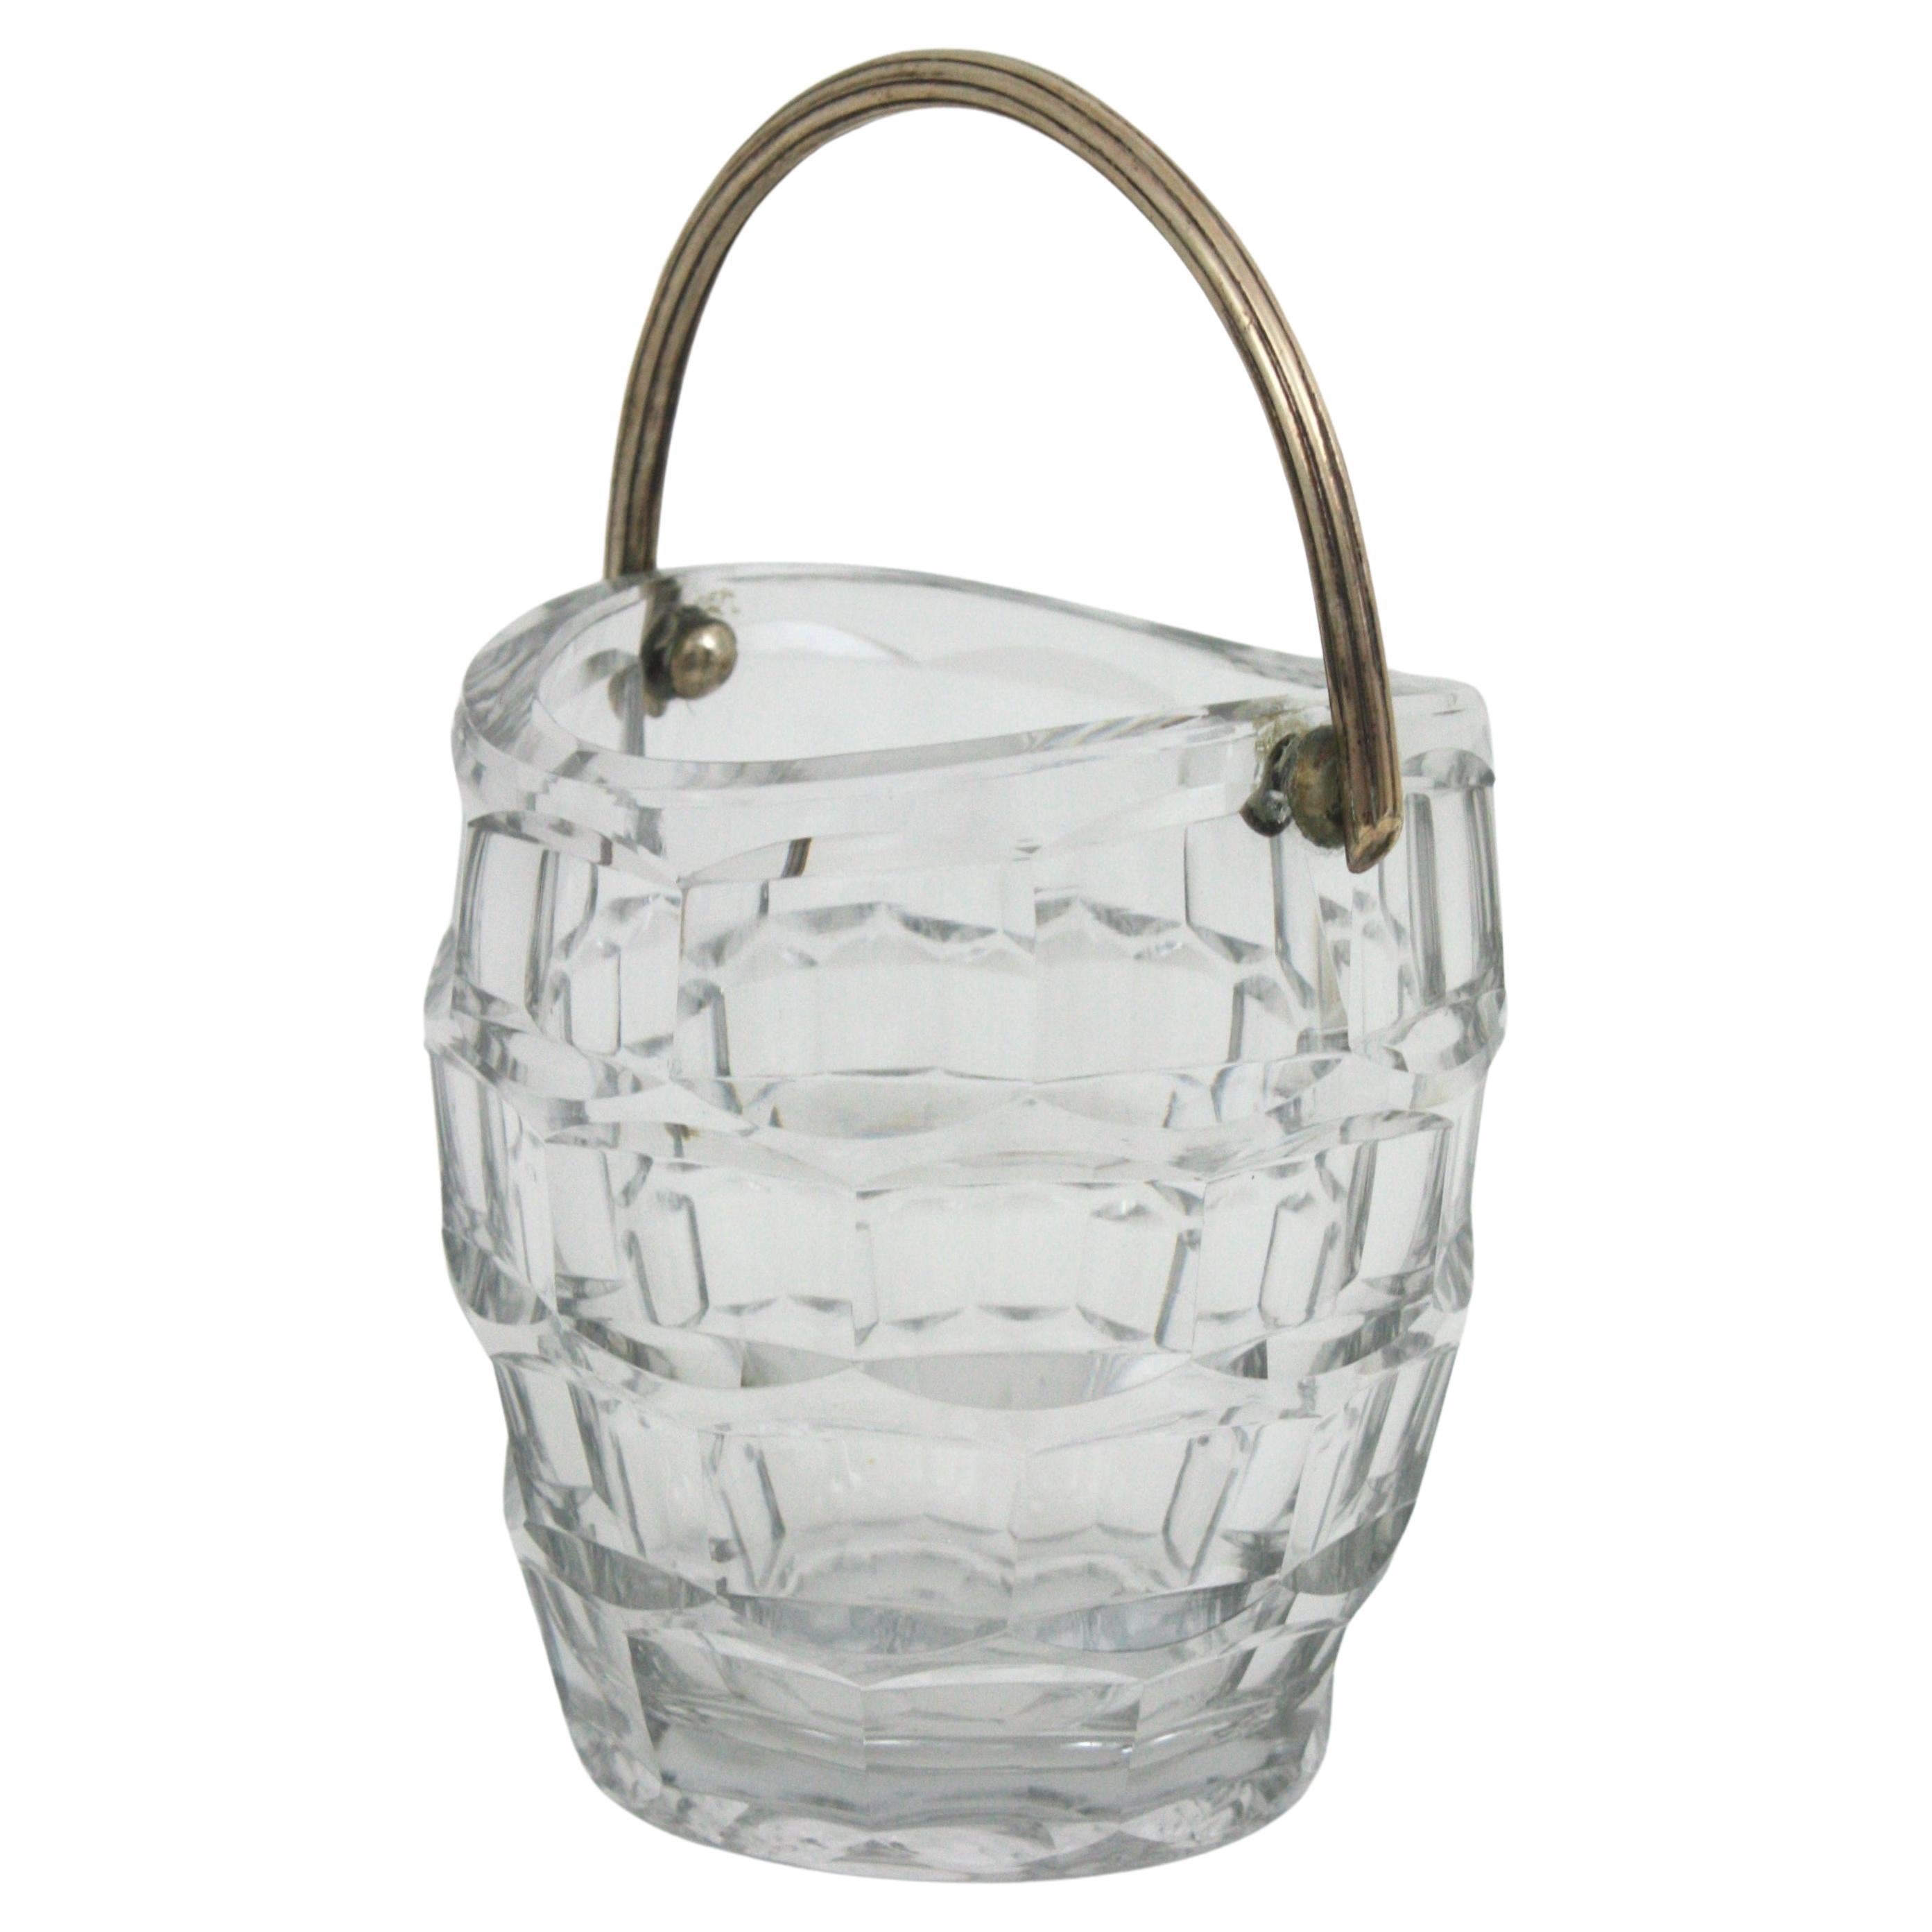 French Midcentury Baccarat Cut Crystal and Silver Ice Bucket, 1950s For Sale